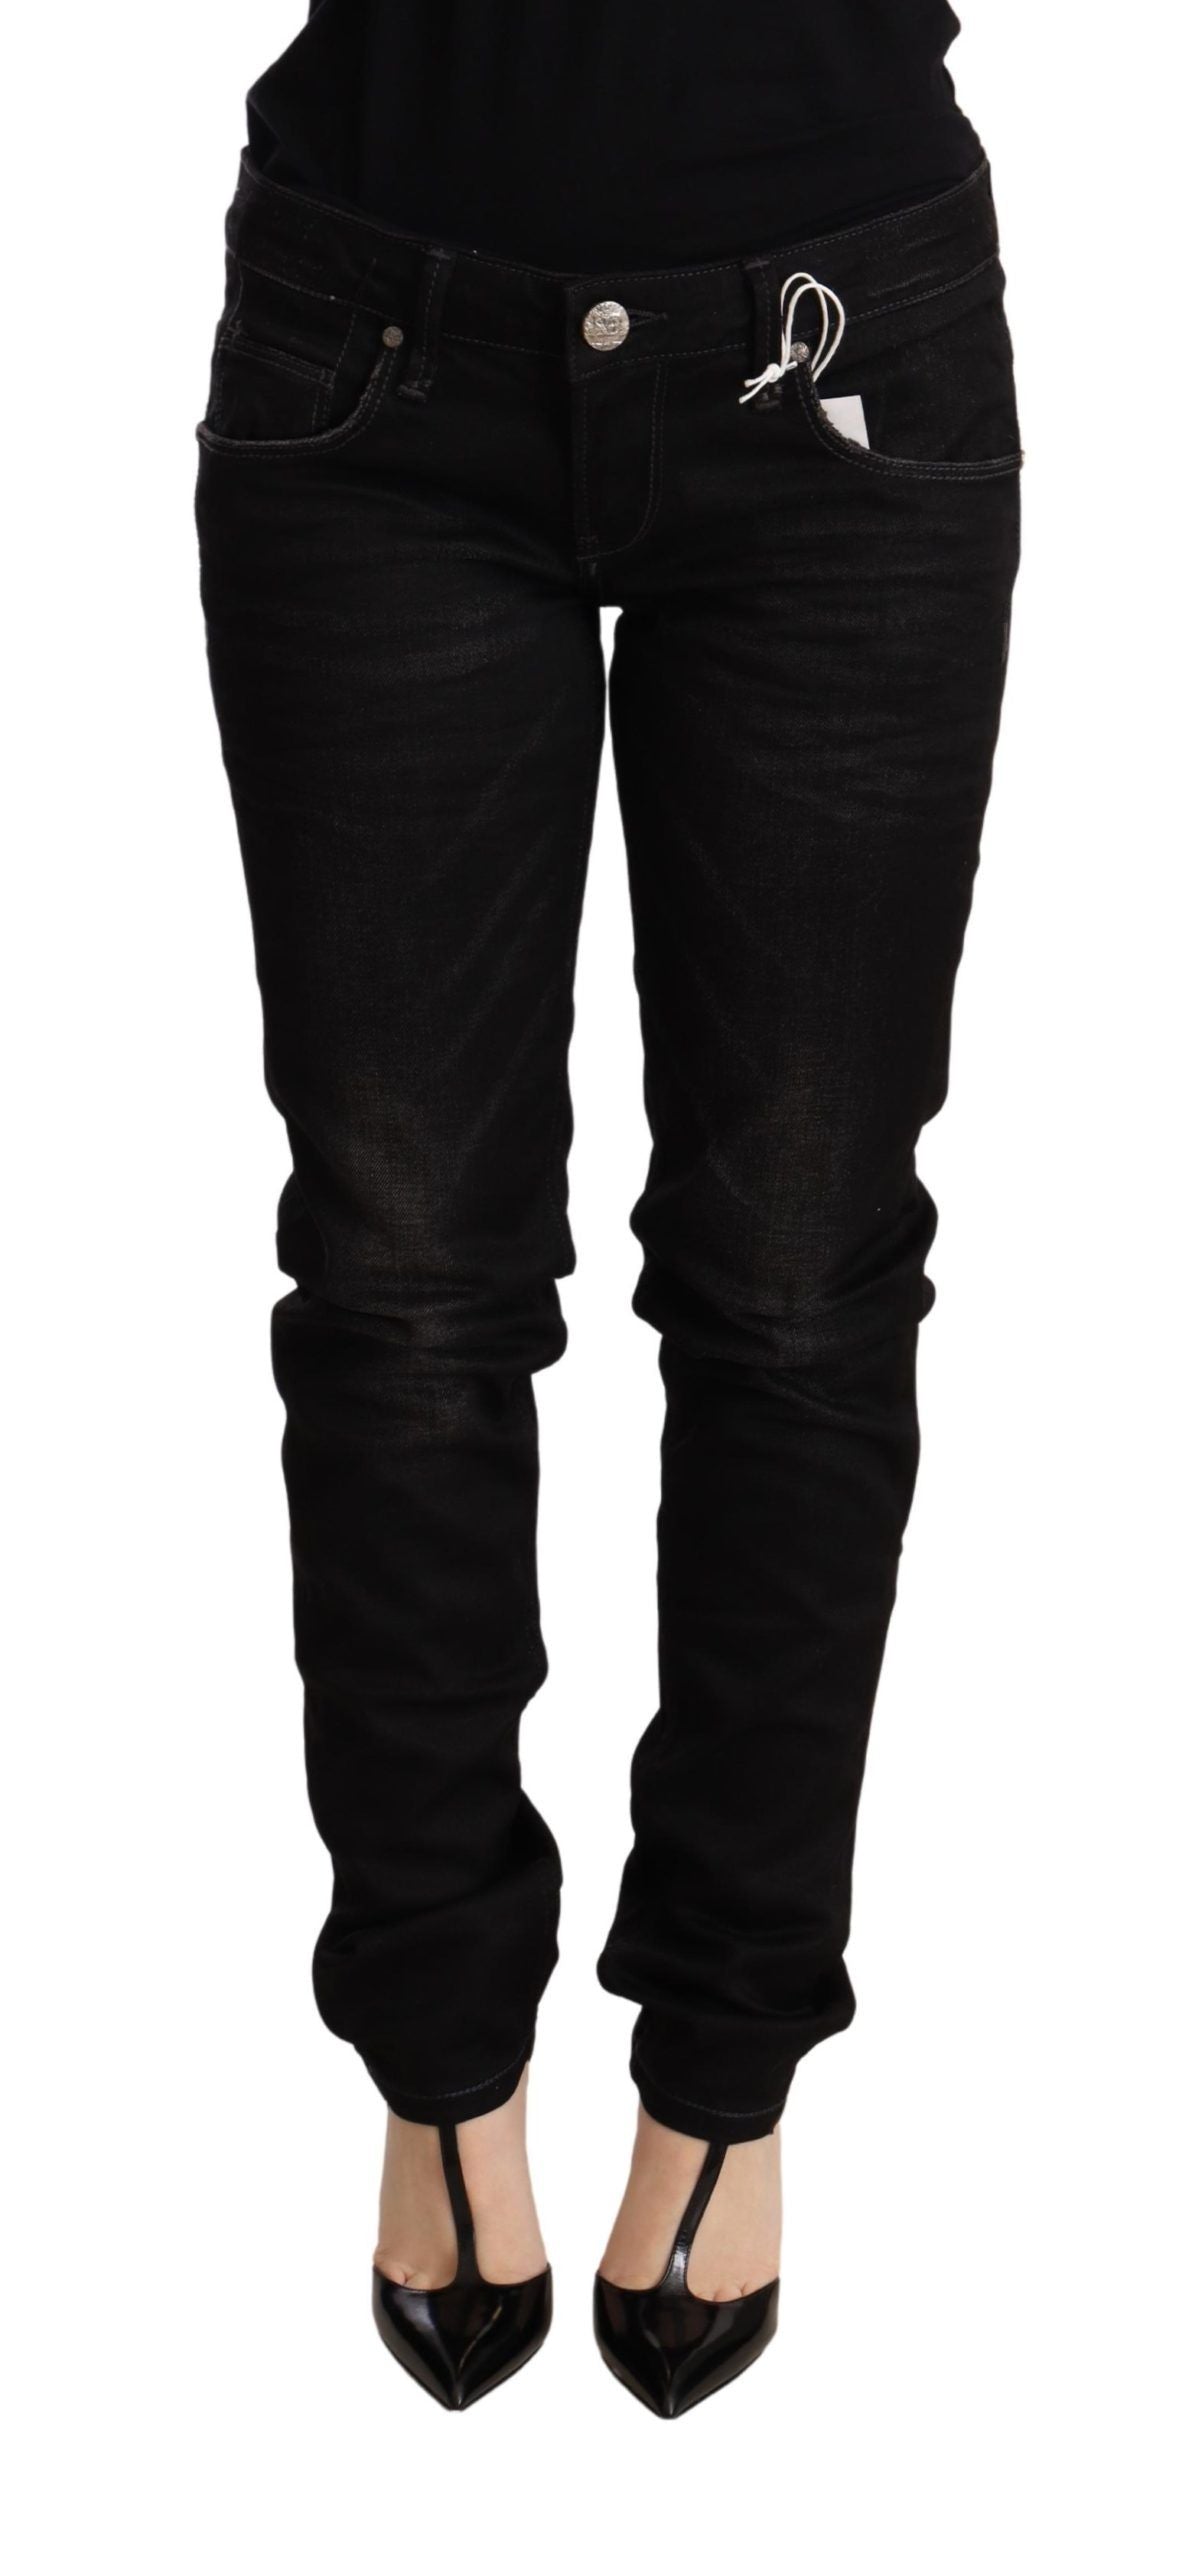 Black Low Waist Skinny Denim Cotton Trouser - Designed by Acht Available to Buy at a Discounted Price on Moon Behind The Hill Online Designer Discount Store